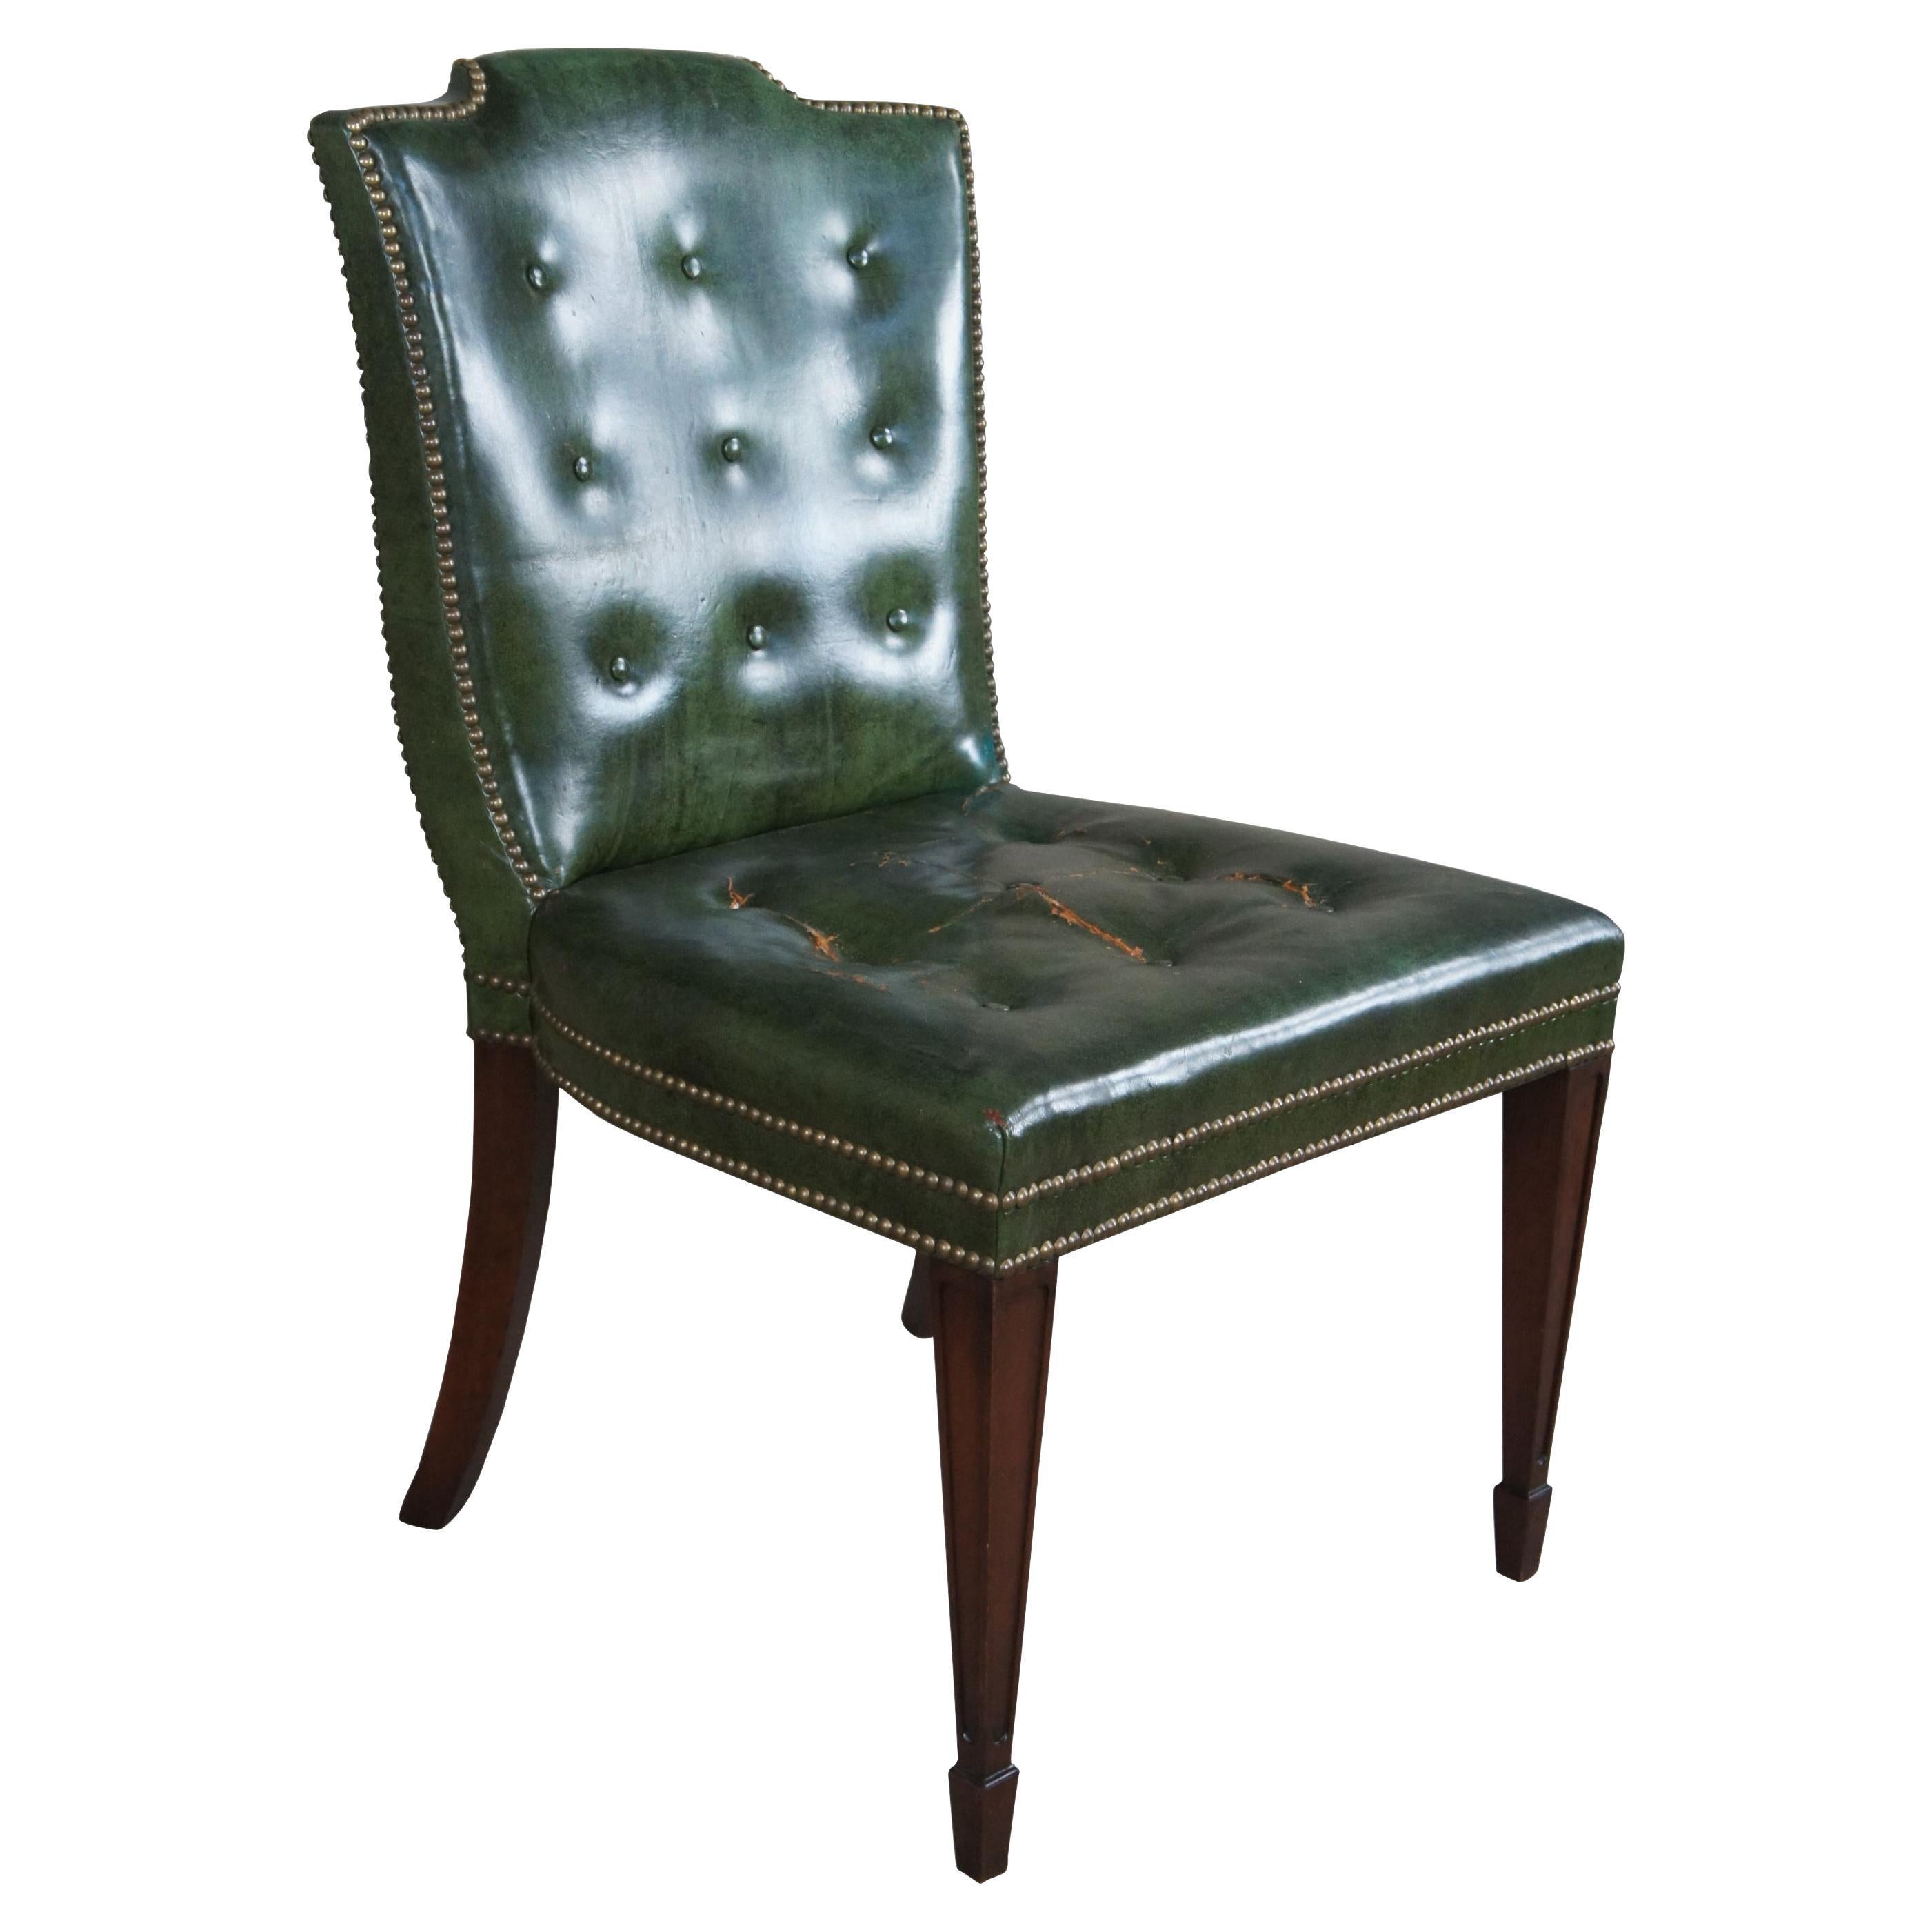 Drexel Heritage Midcentury Sheraton Mahogany Green Leather Tufted Side Chair For Sale